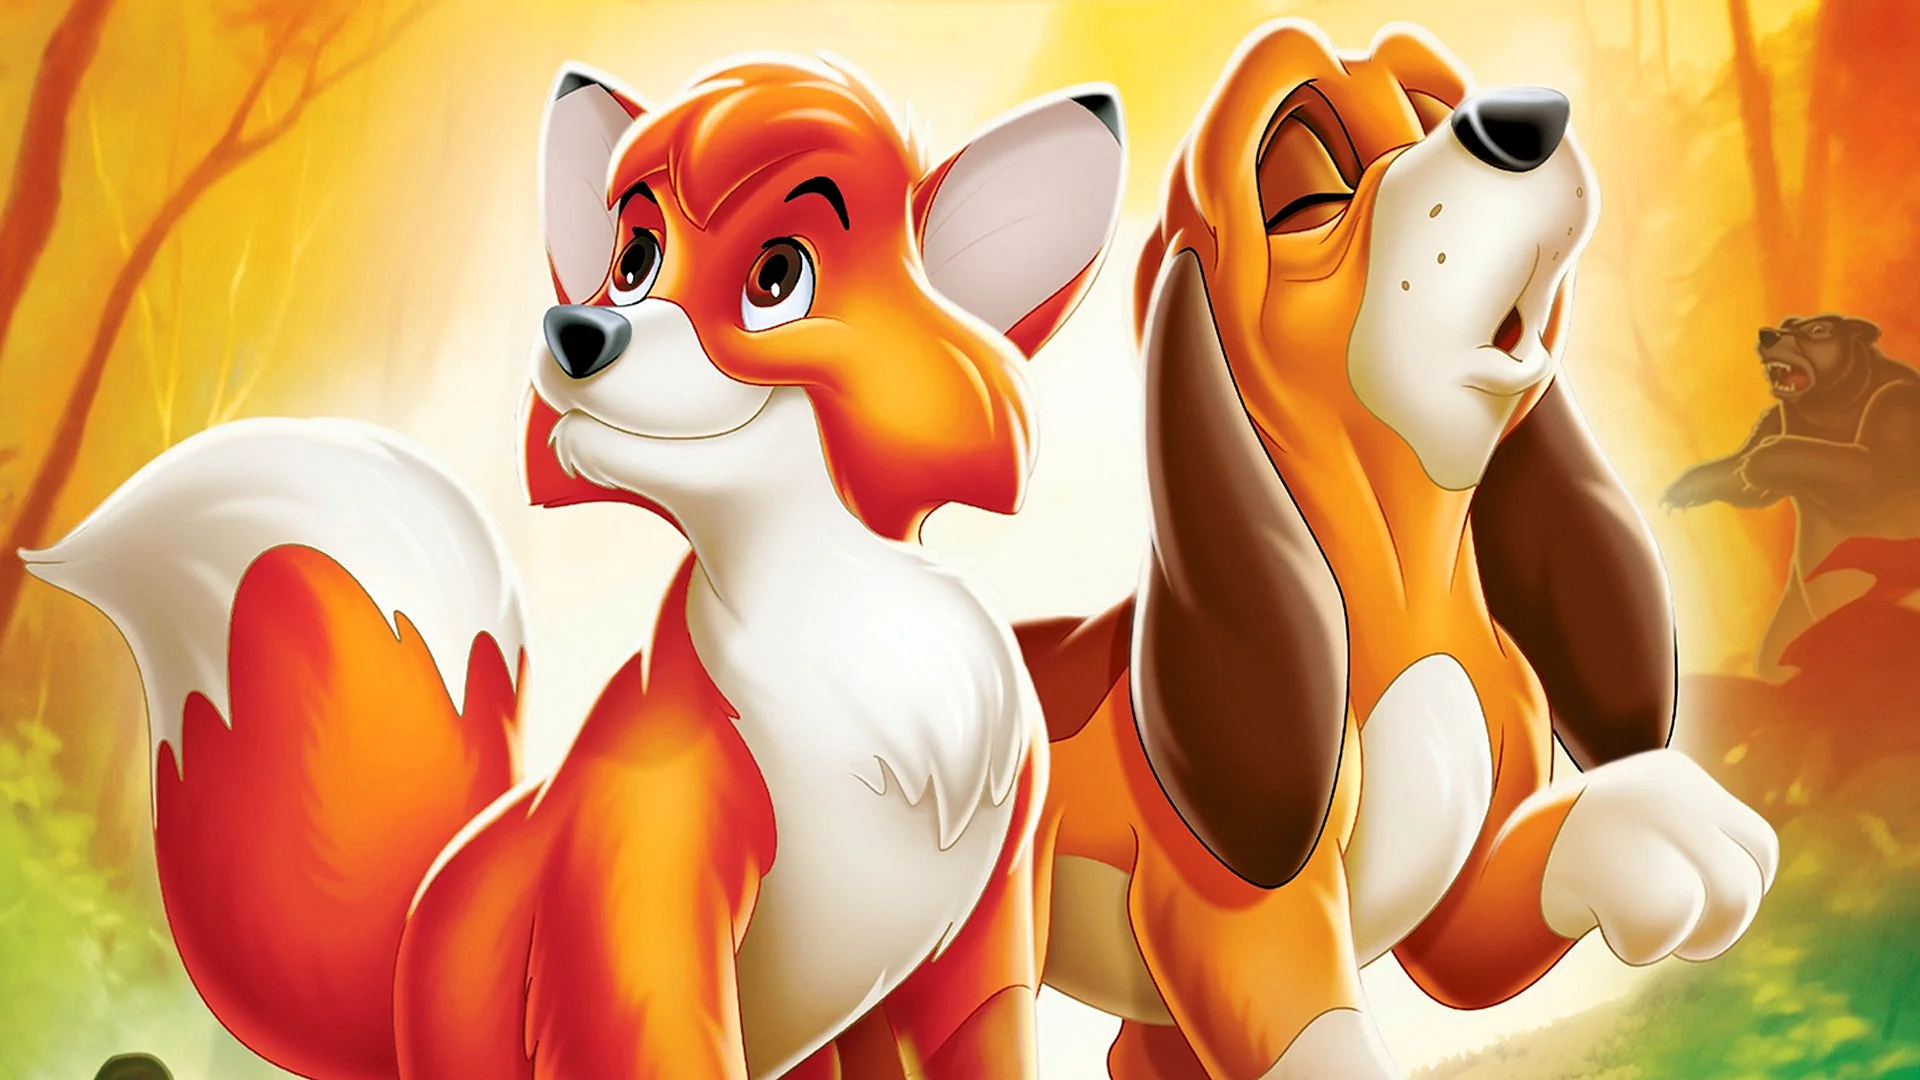 The Fox And The Hound Wallpaper